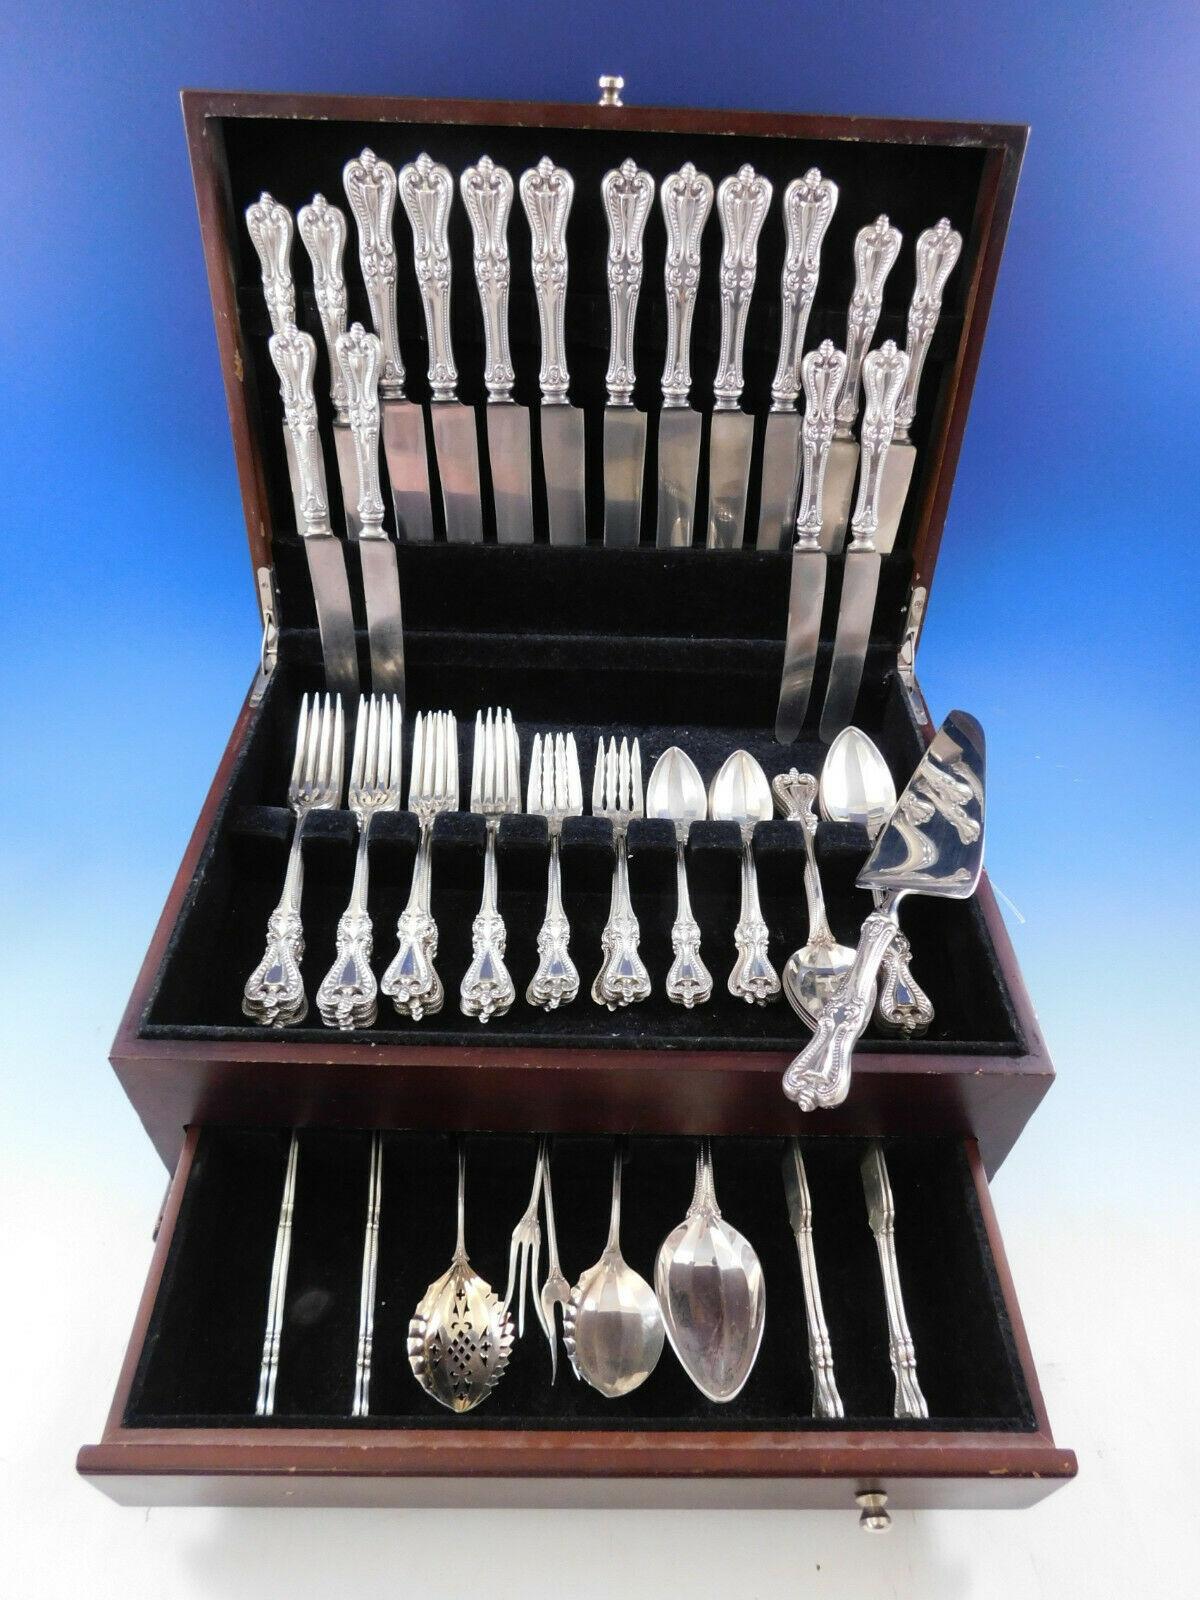 Old Colonial by Towle sterling silver flatware set, 70 pieces. This set includes:

8 dinner knives w/stainless old french blades, 9 3/4